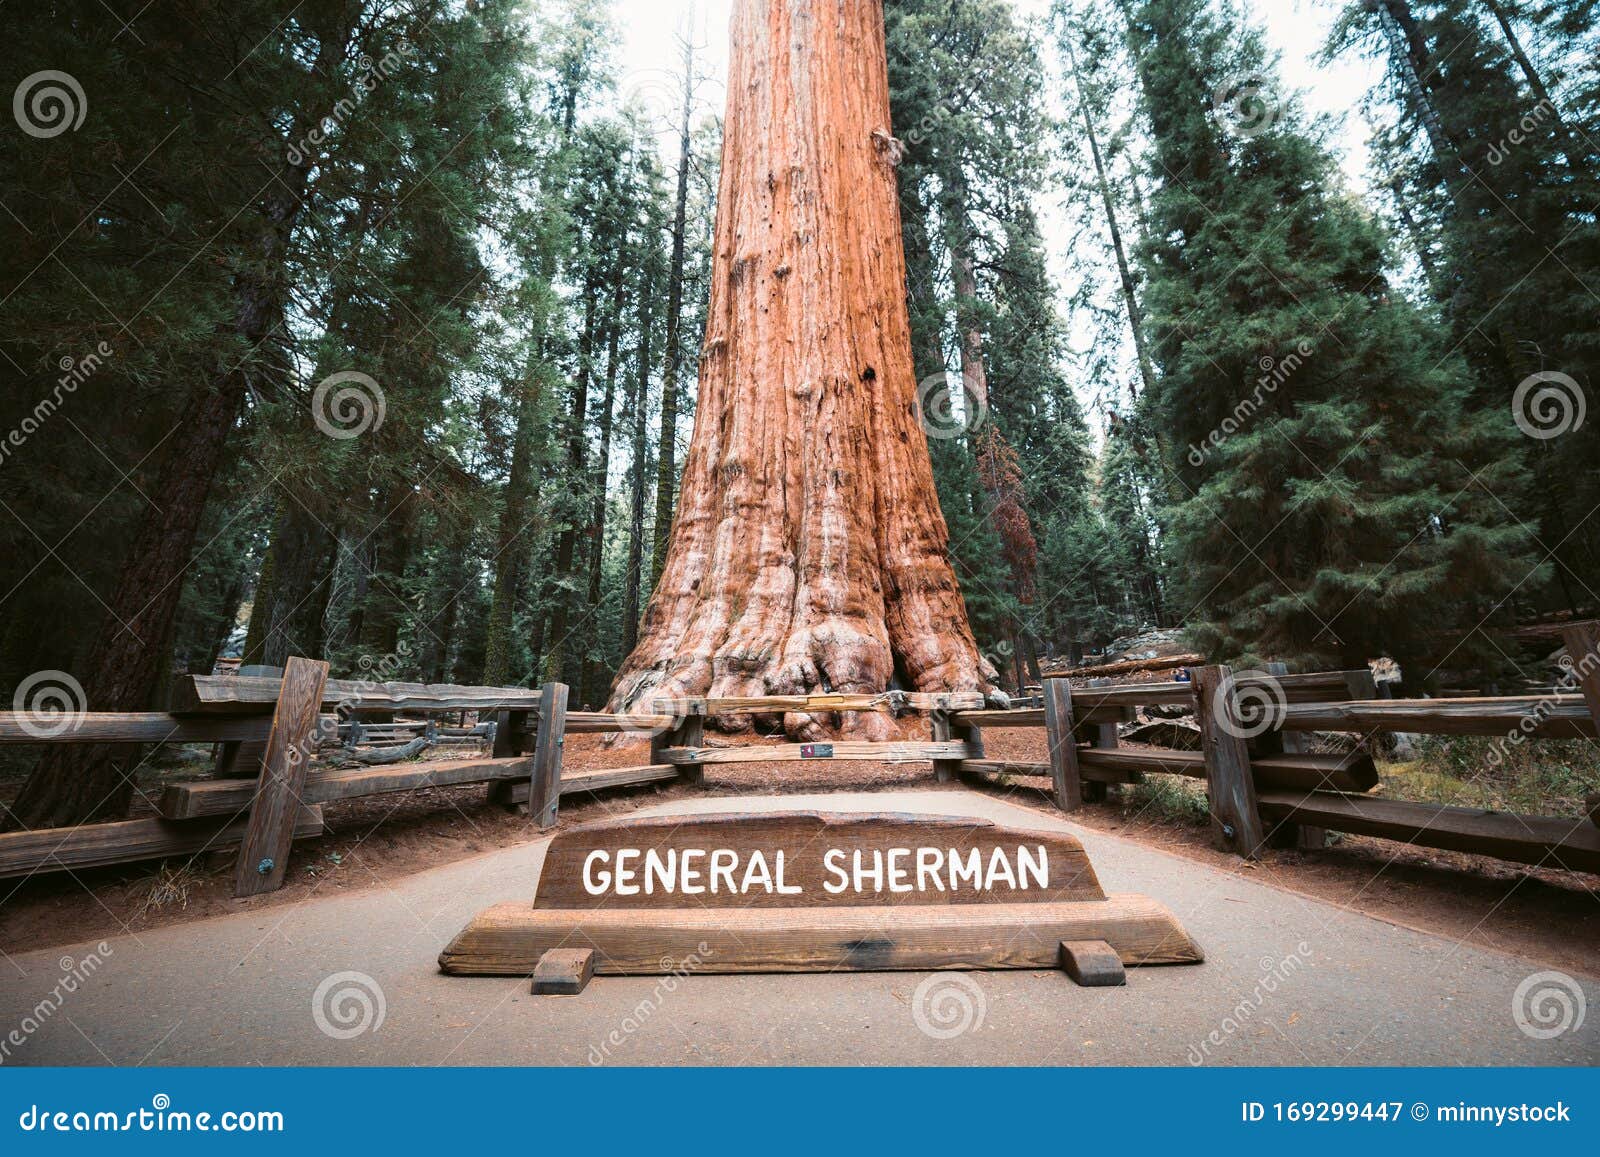 general sherman tree, the world`s largest tree by volume, sequoia national park, california, usa